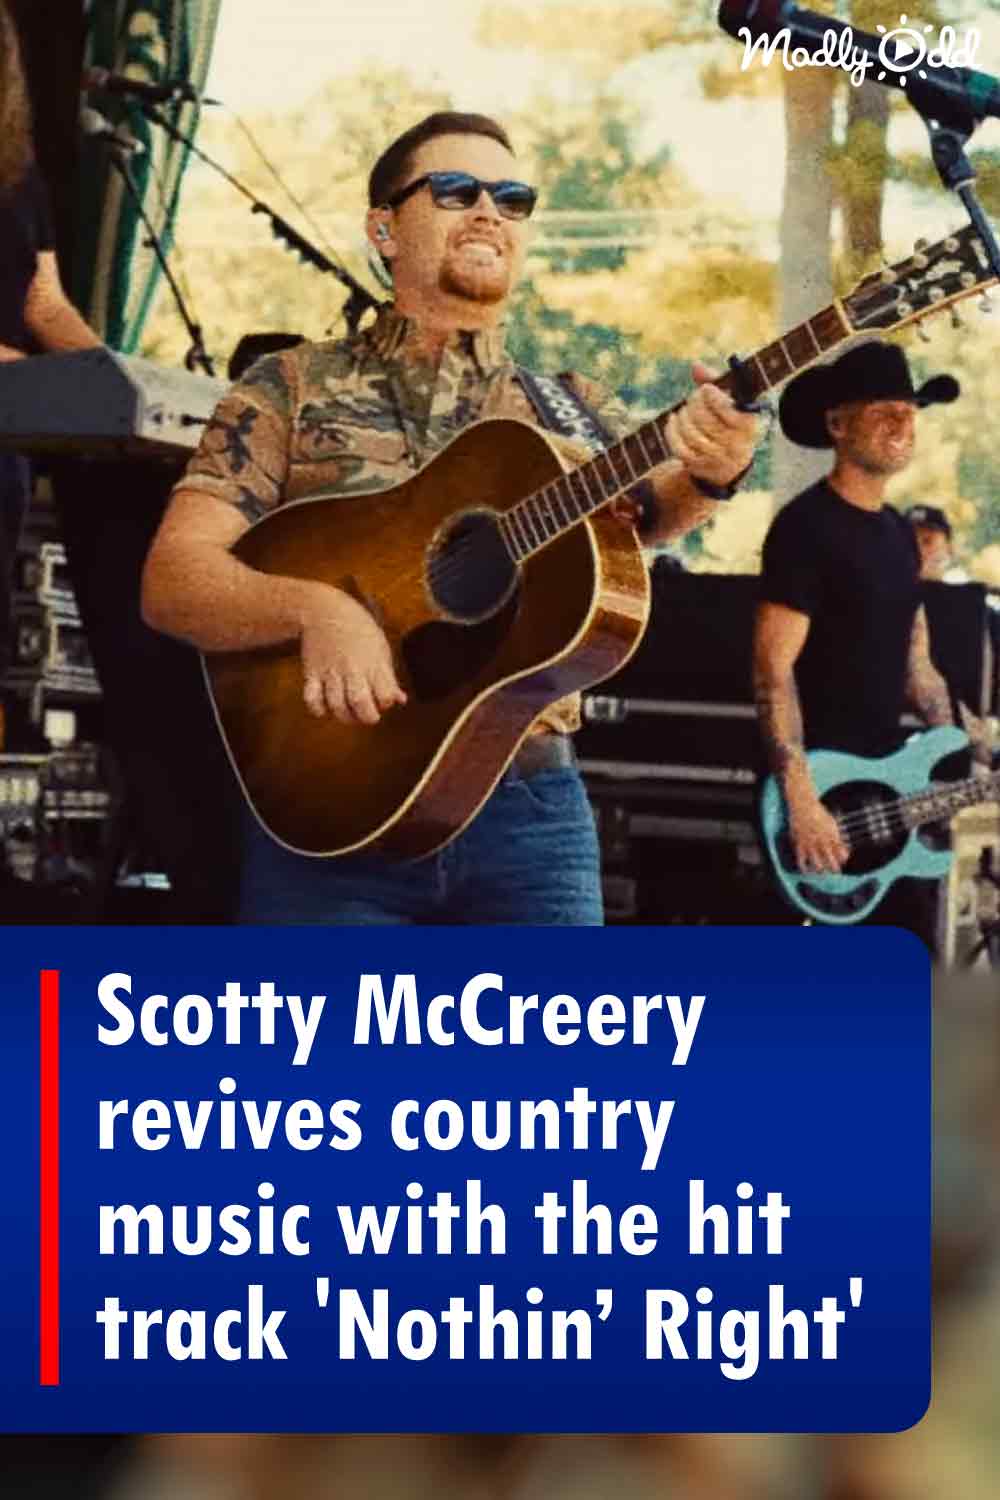 Scotty McCreery revives country music with the hit track \'Nothin’ Right\'